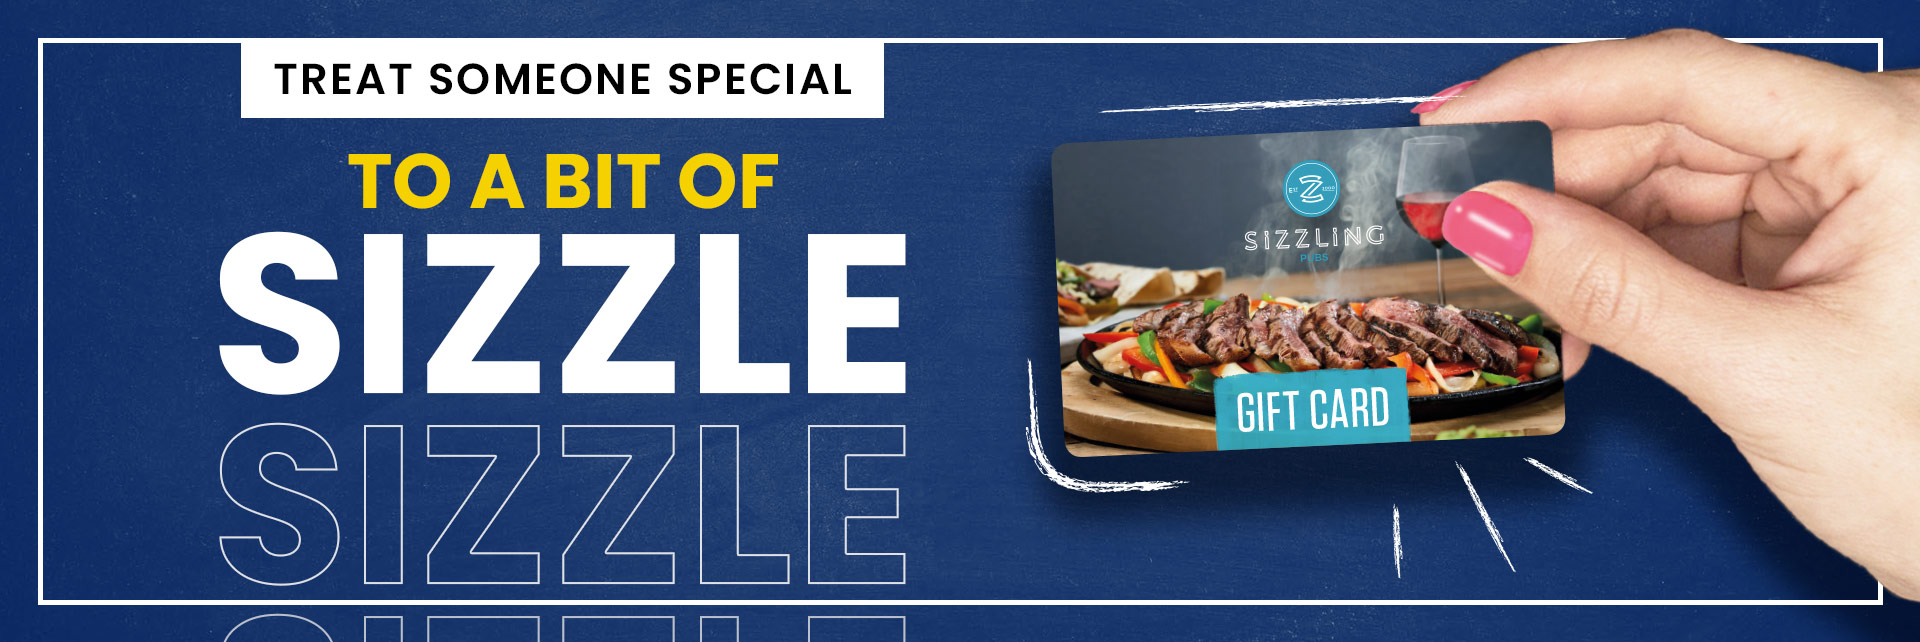 Sizzling Pubs Gift Card at The Three Magpies Hotel in Rotherham